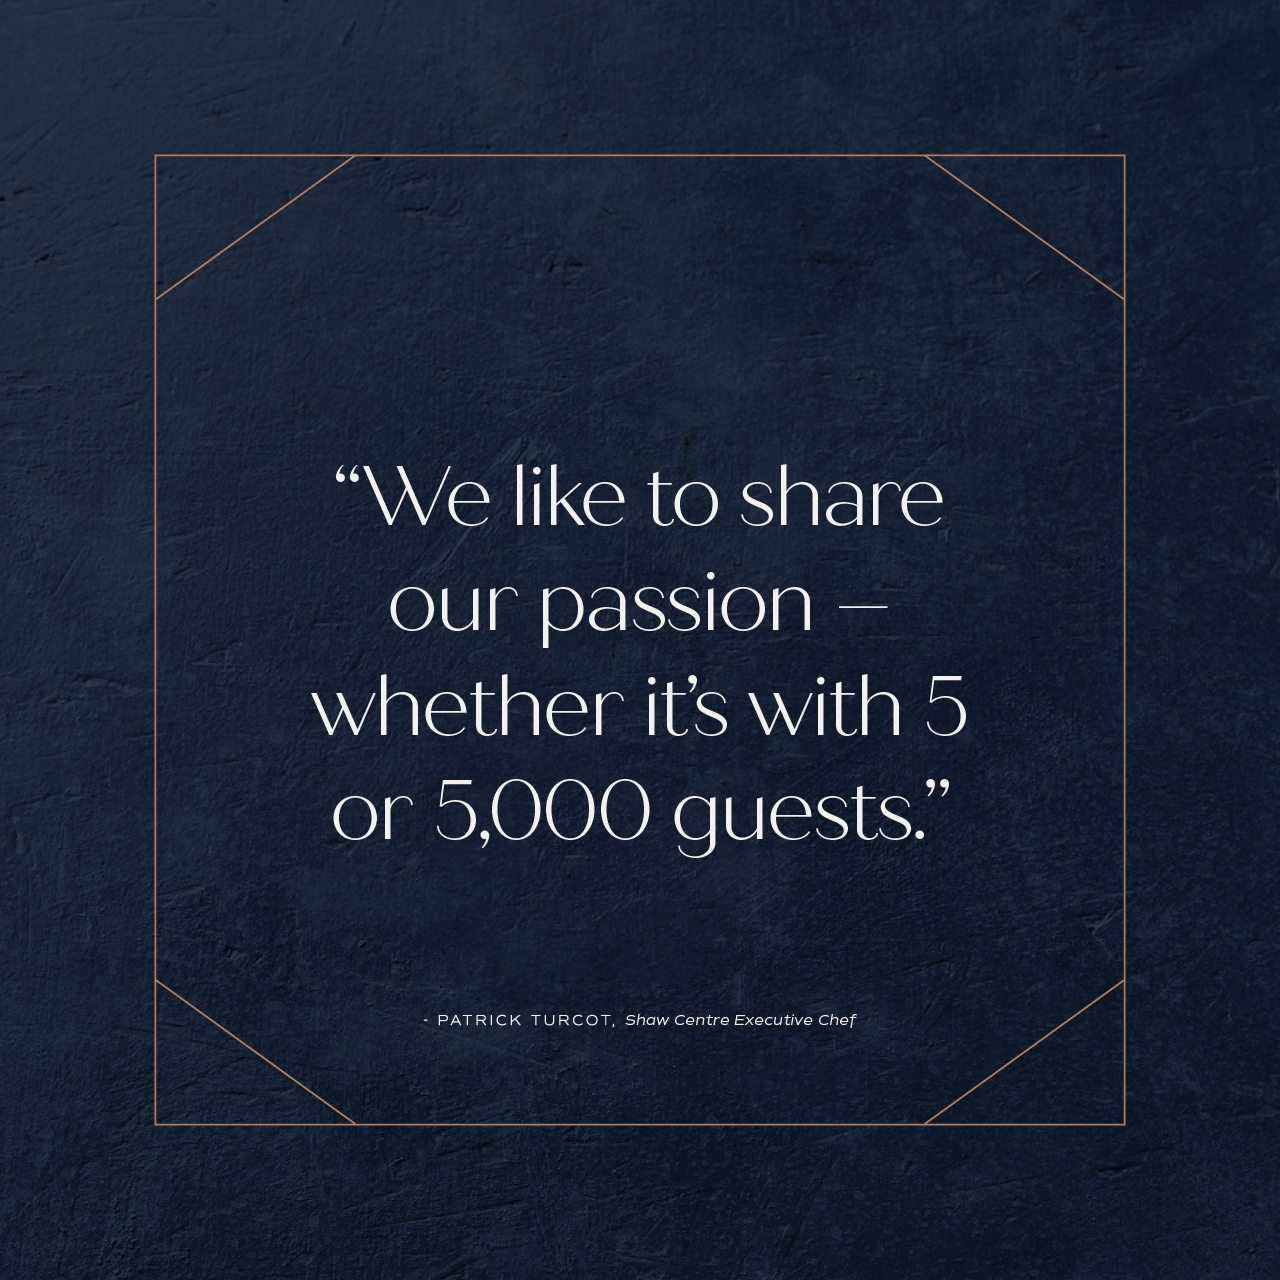 We like to share our passion – whether it's with 5 of 5,000 guests.